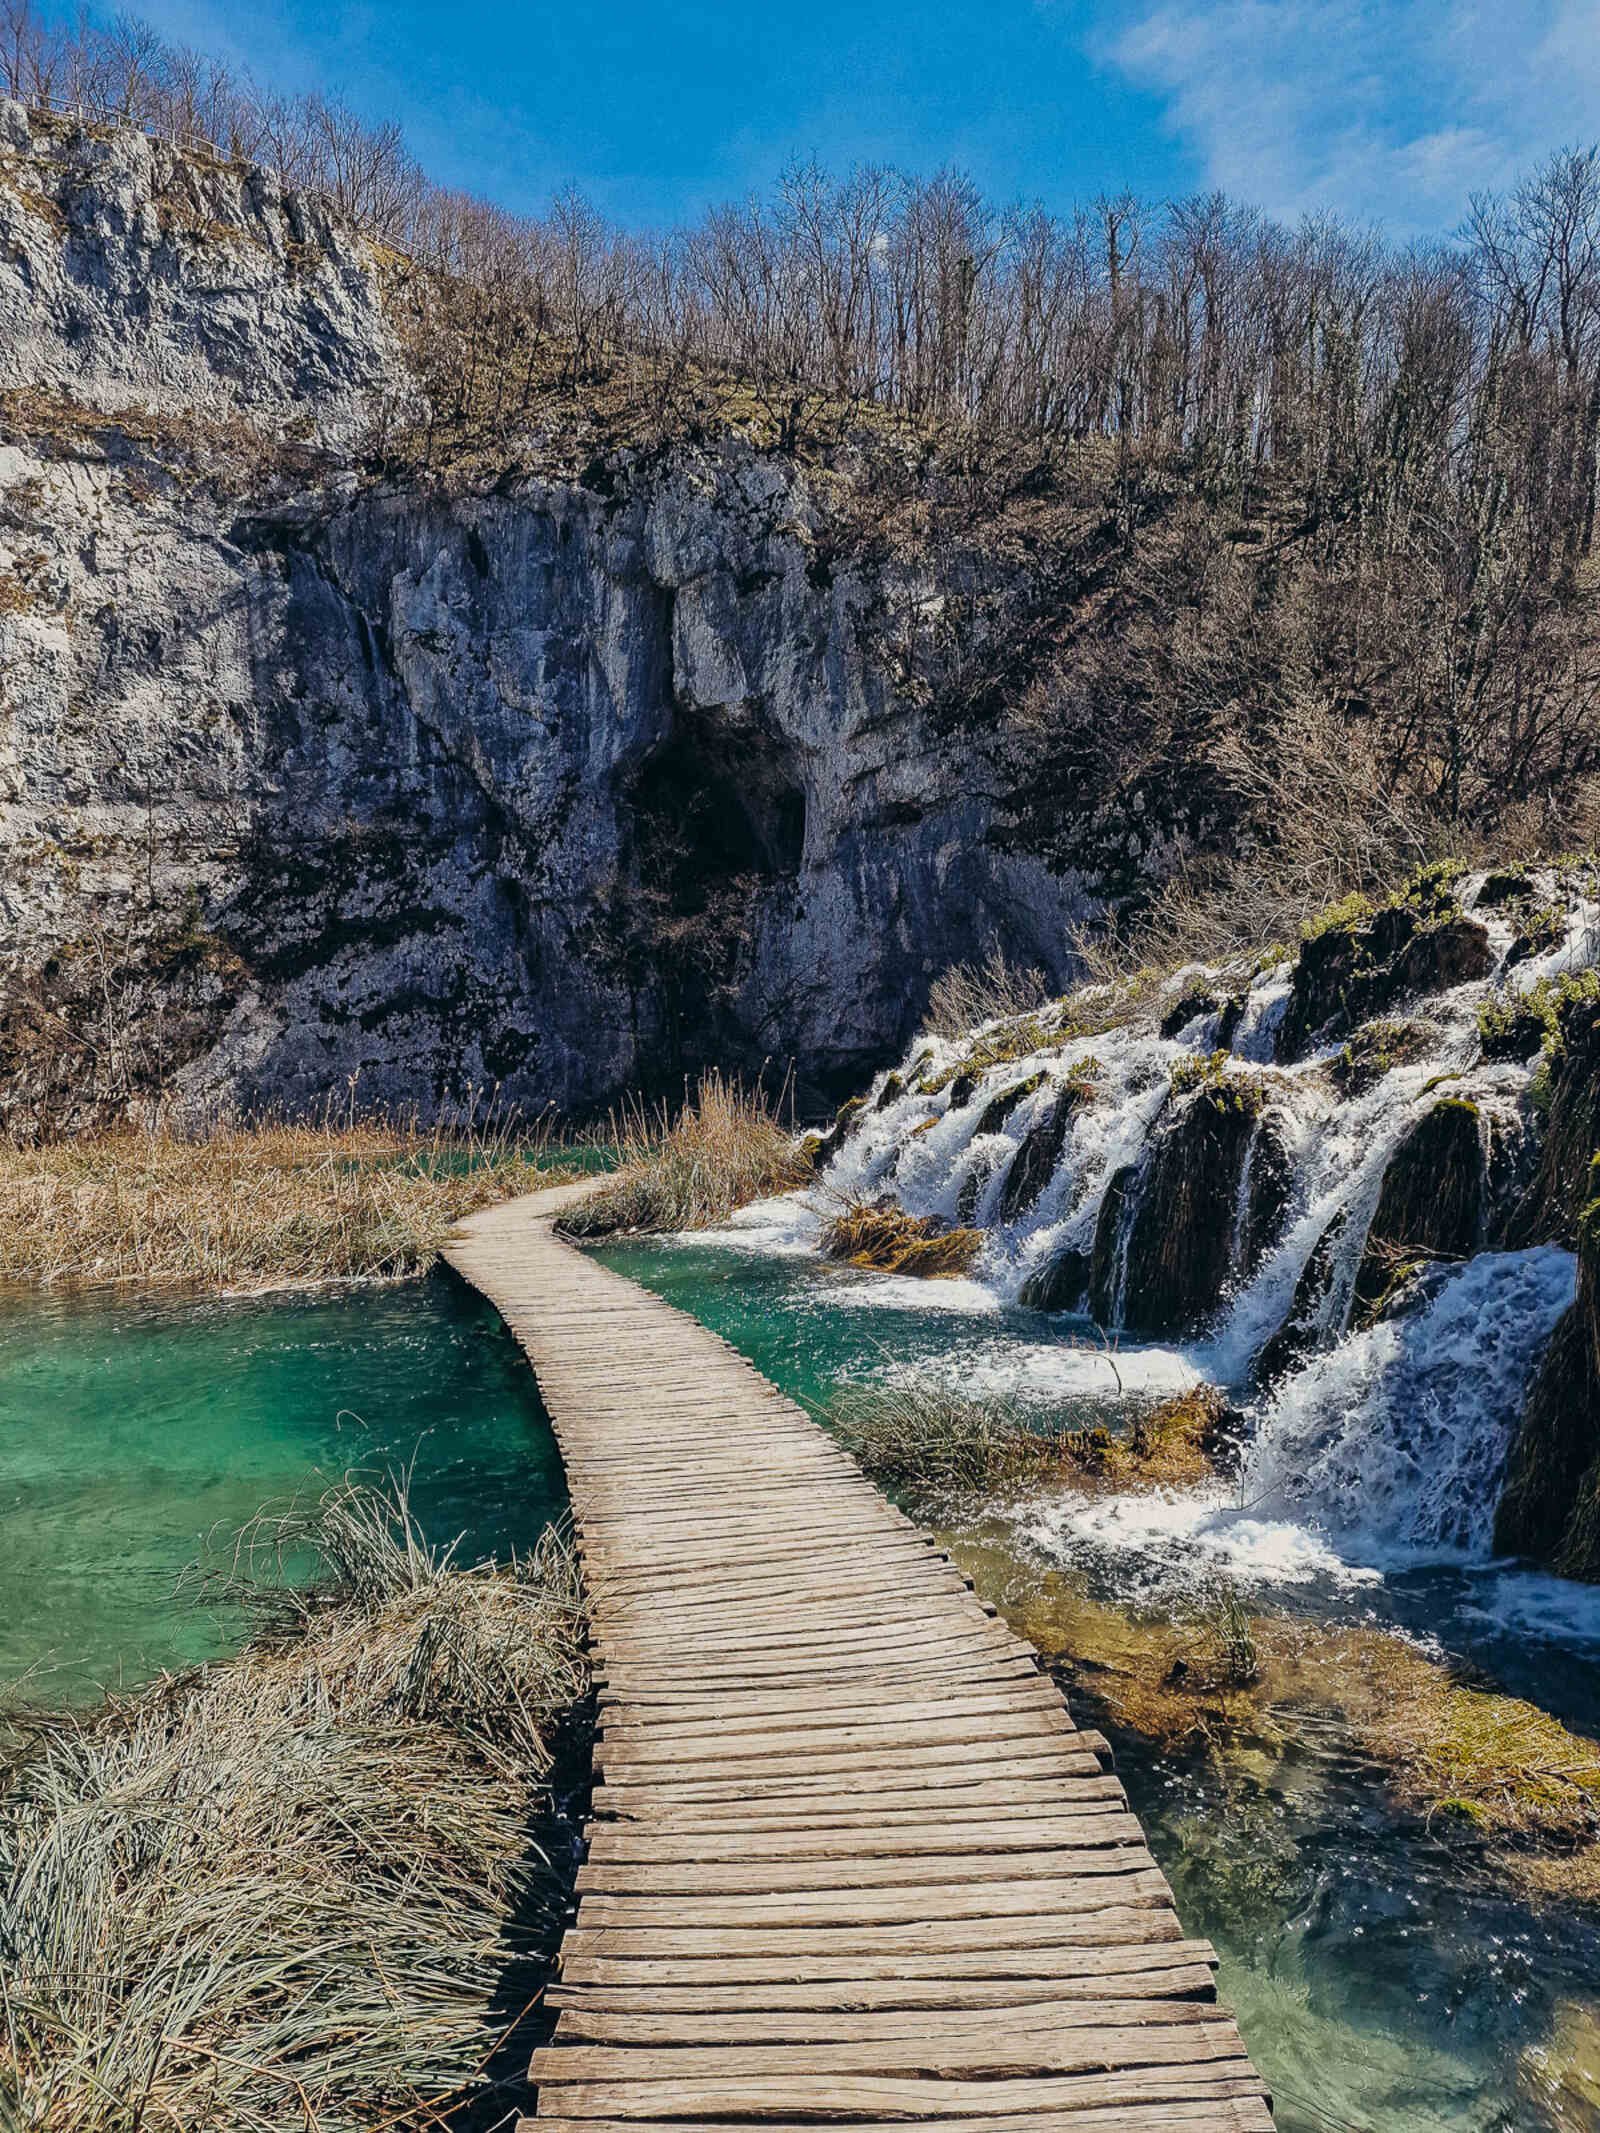 a wooden walkway over turquoise water with small waterfalls running on the righthand side. Cliffs with a cave are in the distance